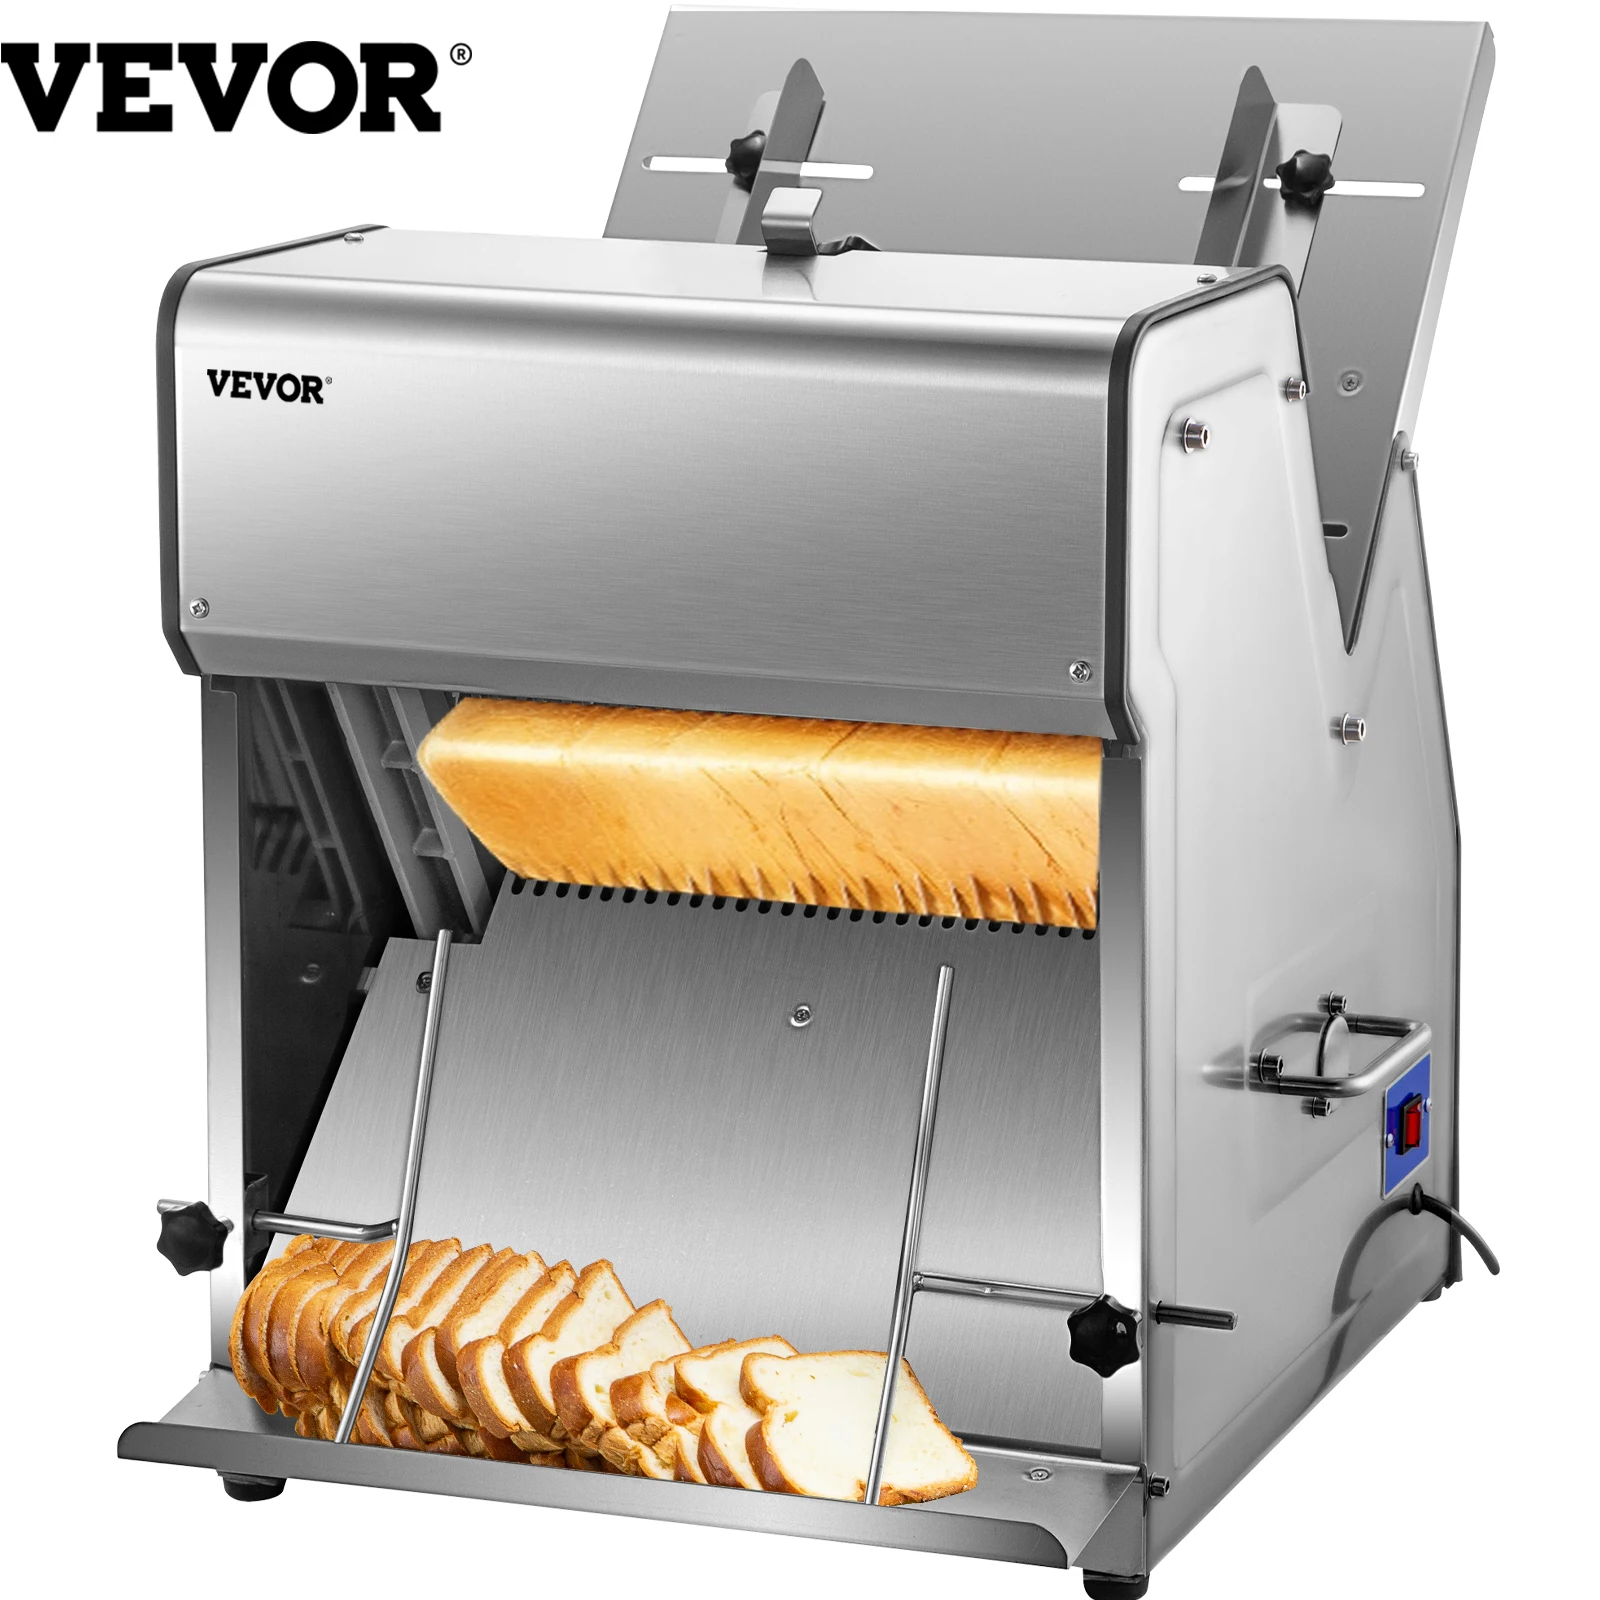 VEVOR Commercial Bread Slicer 370W Stainless Steel 12mm Blades Electric Bread Cutting Machine Kitchen Appliance Toast Processor